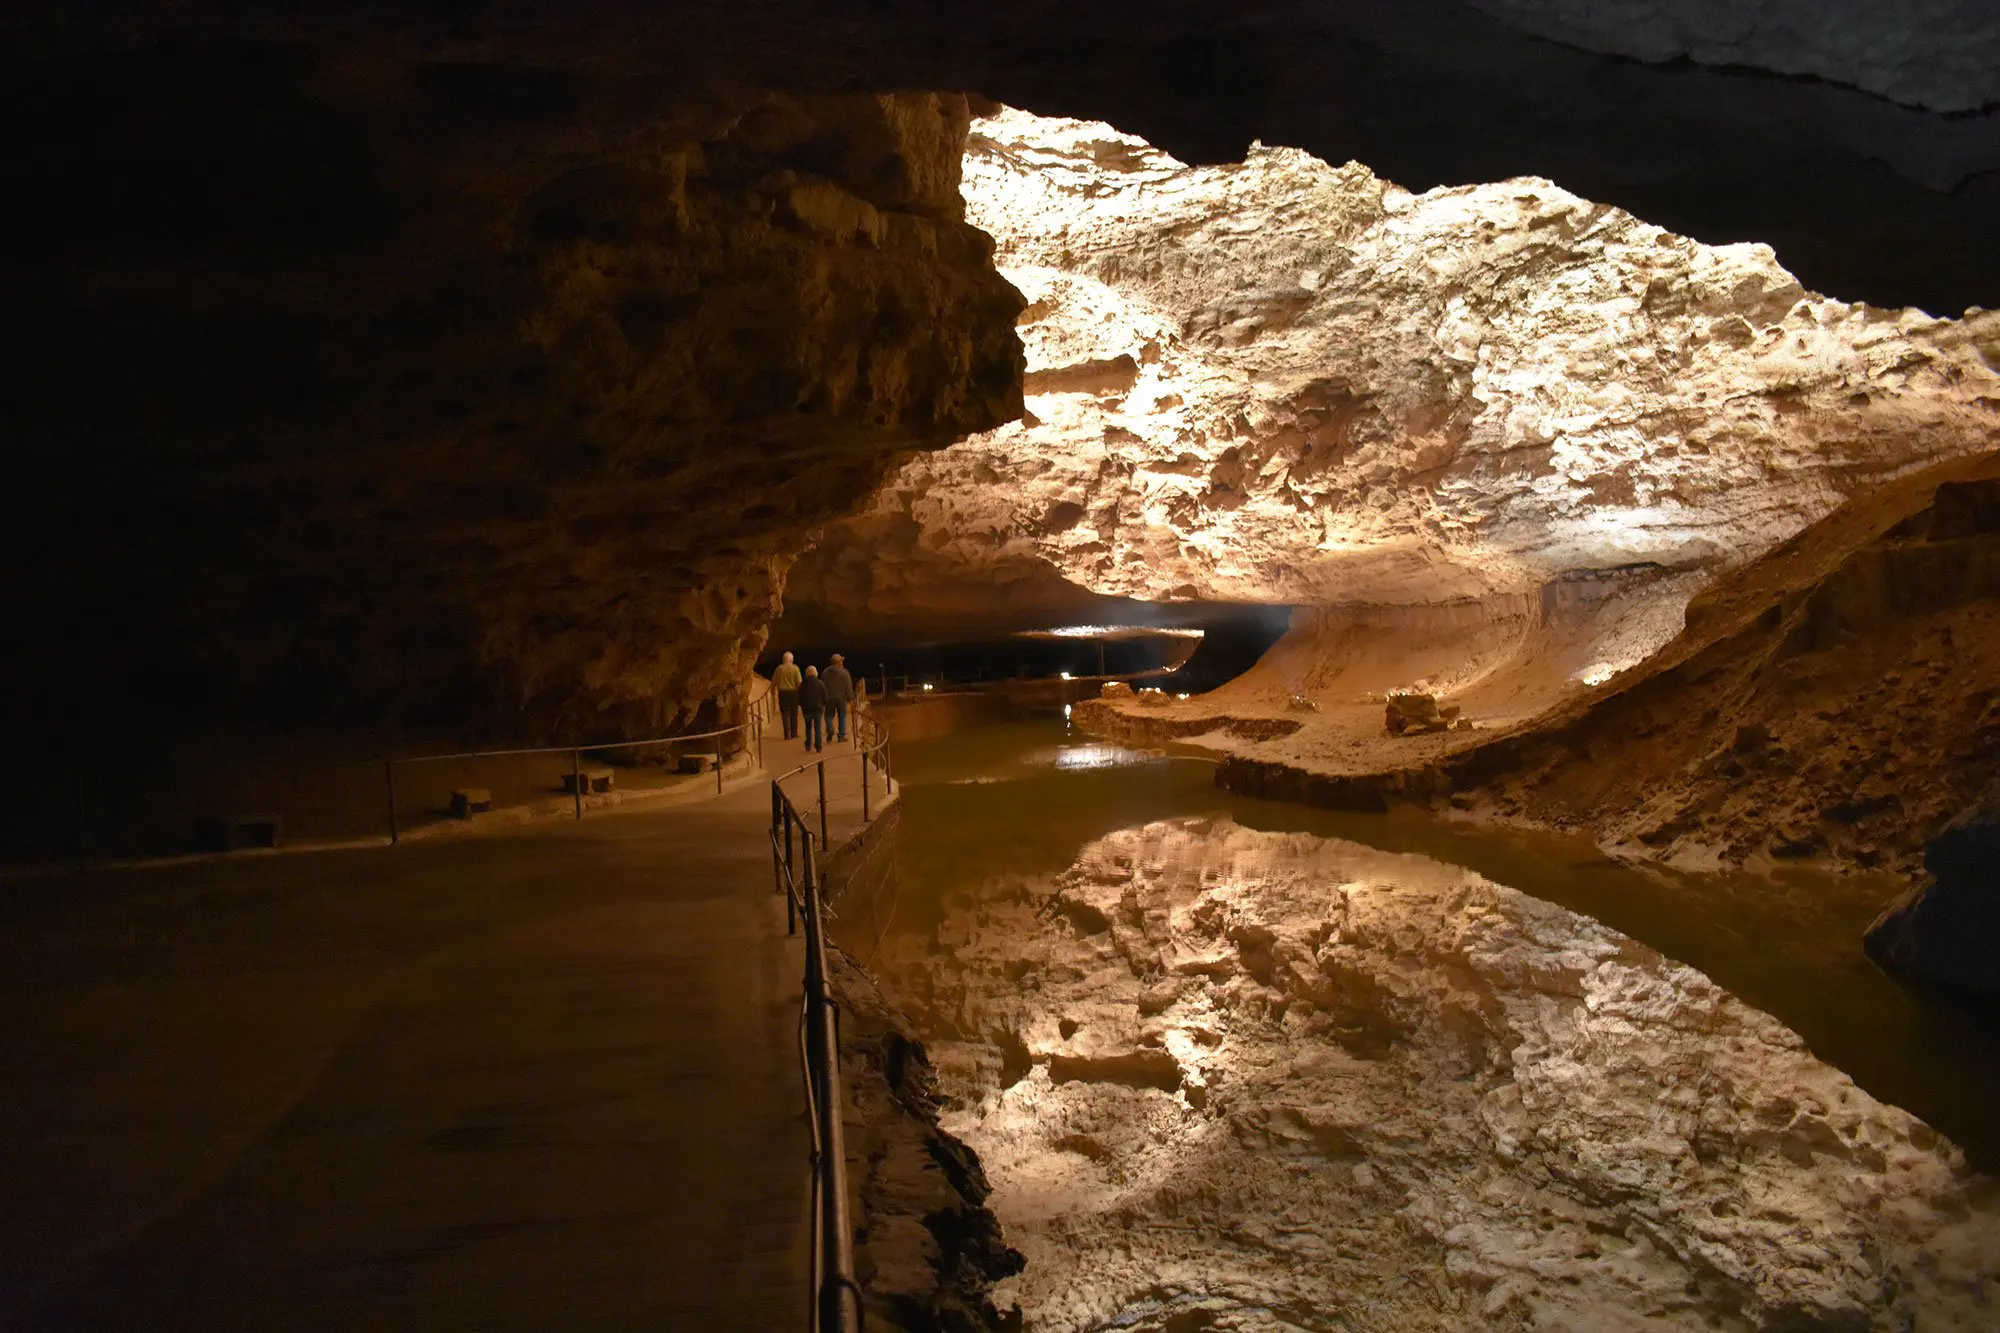 The Mirror Room is a room within the cavern that contains a stream of water about 1.5 ft deep. However, when a group of lights are turned on, the depth of the water is perceived by many to be as great as 50 ft, due to the reflection of the cavern's roof on the undisturbed water.